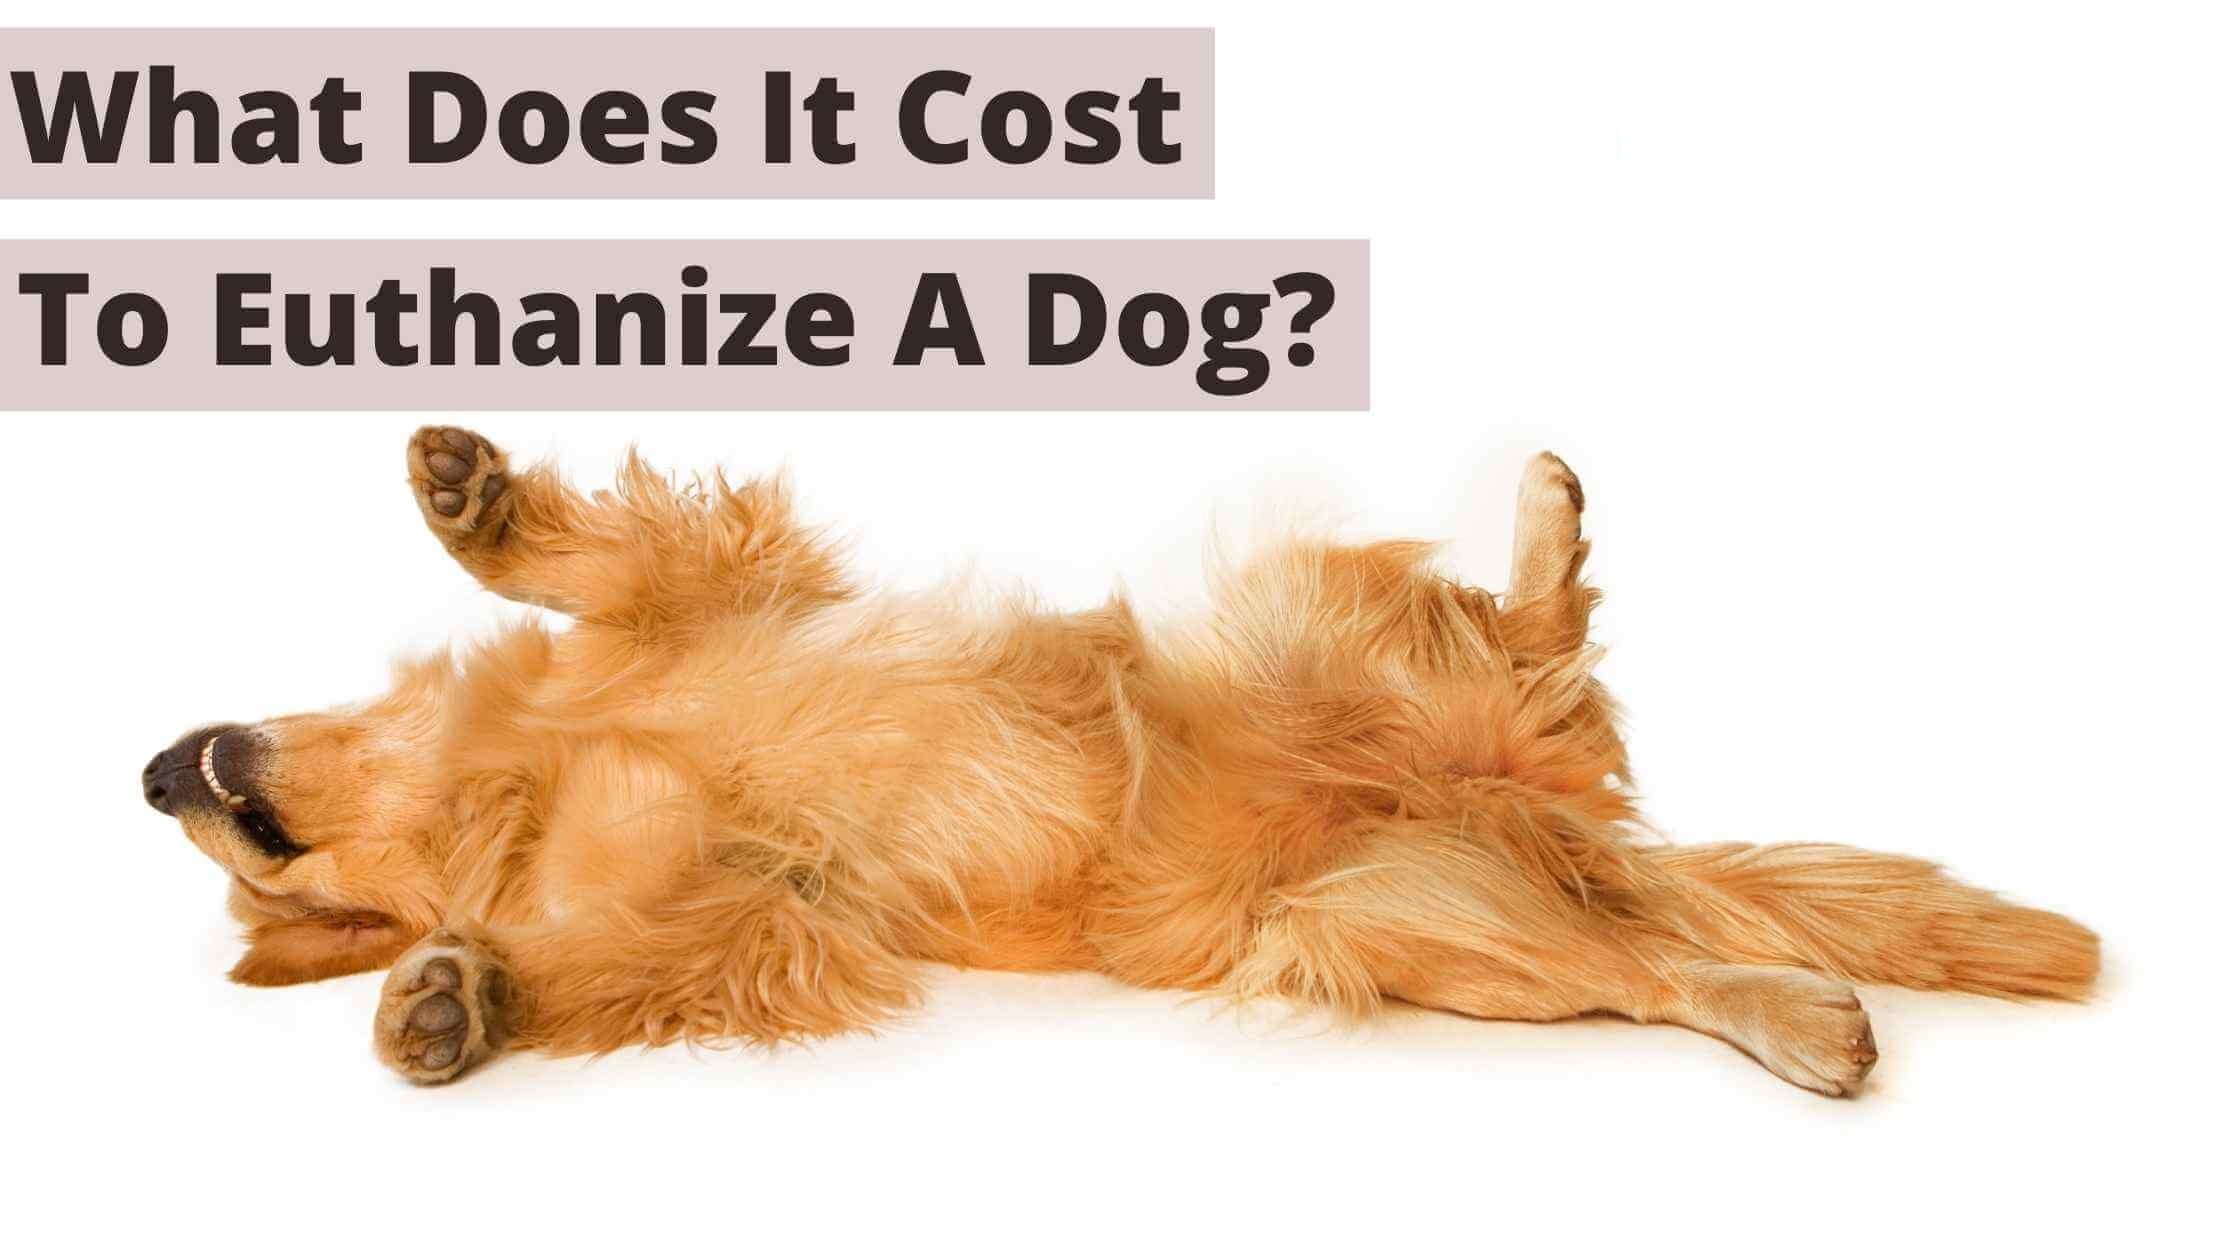 How Much Does Euthanizing A Dog Cost